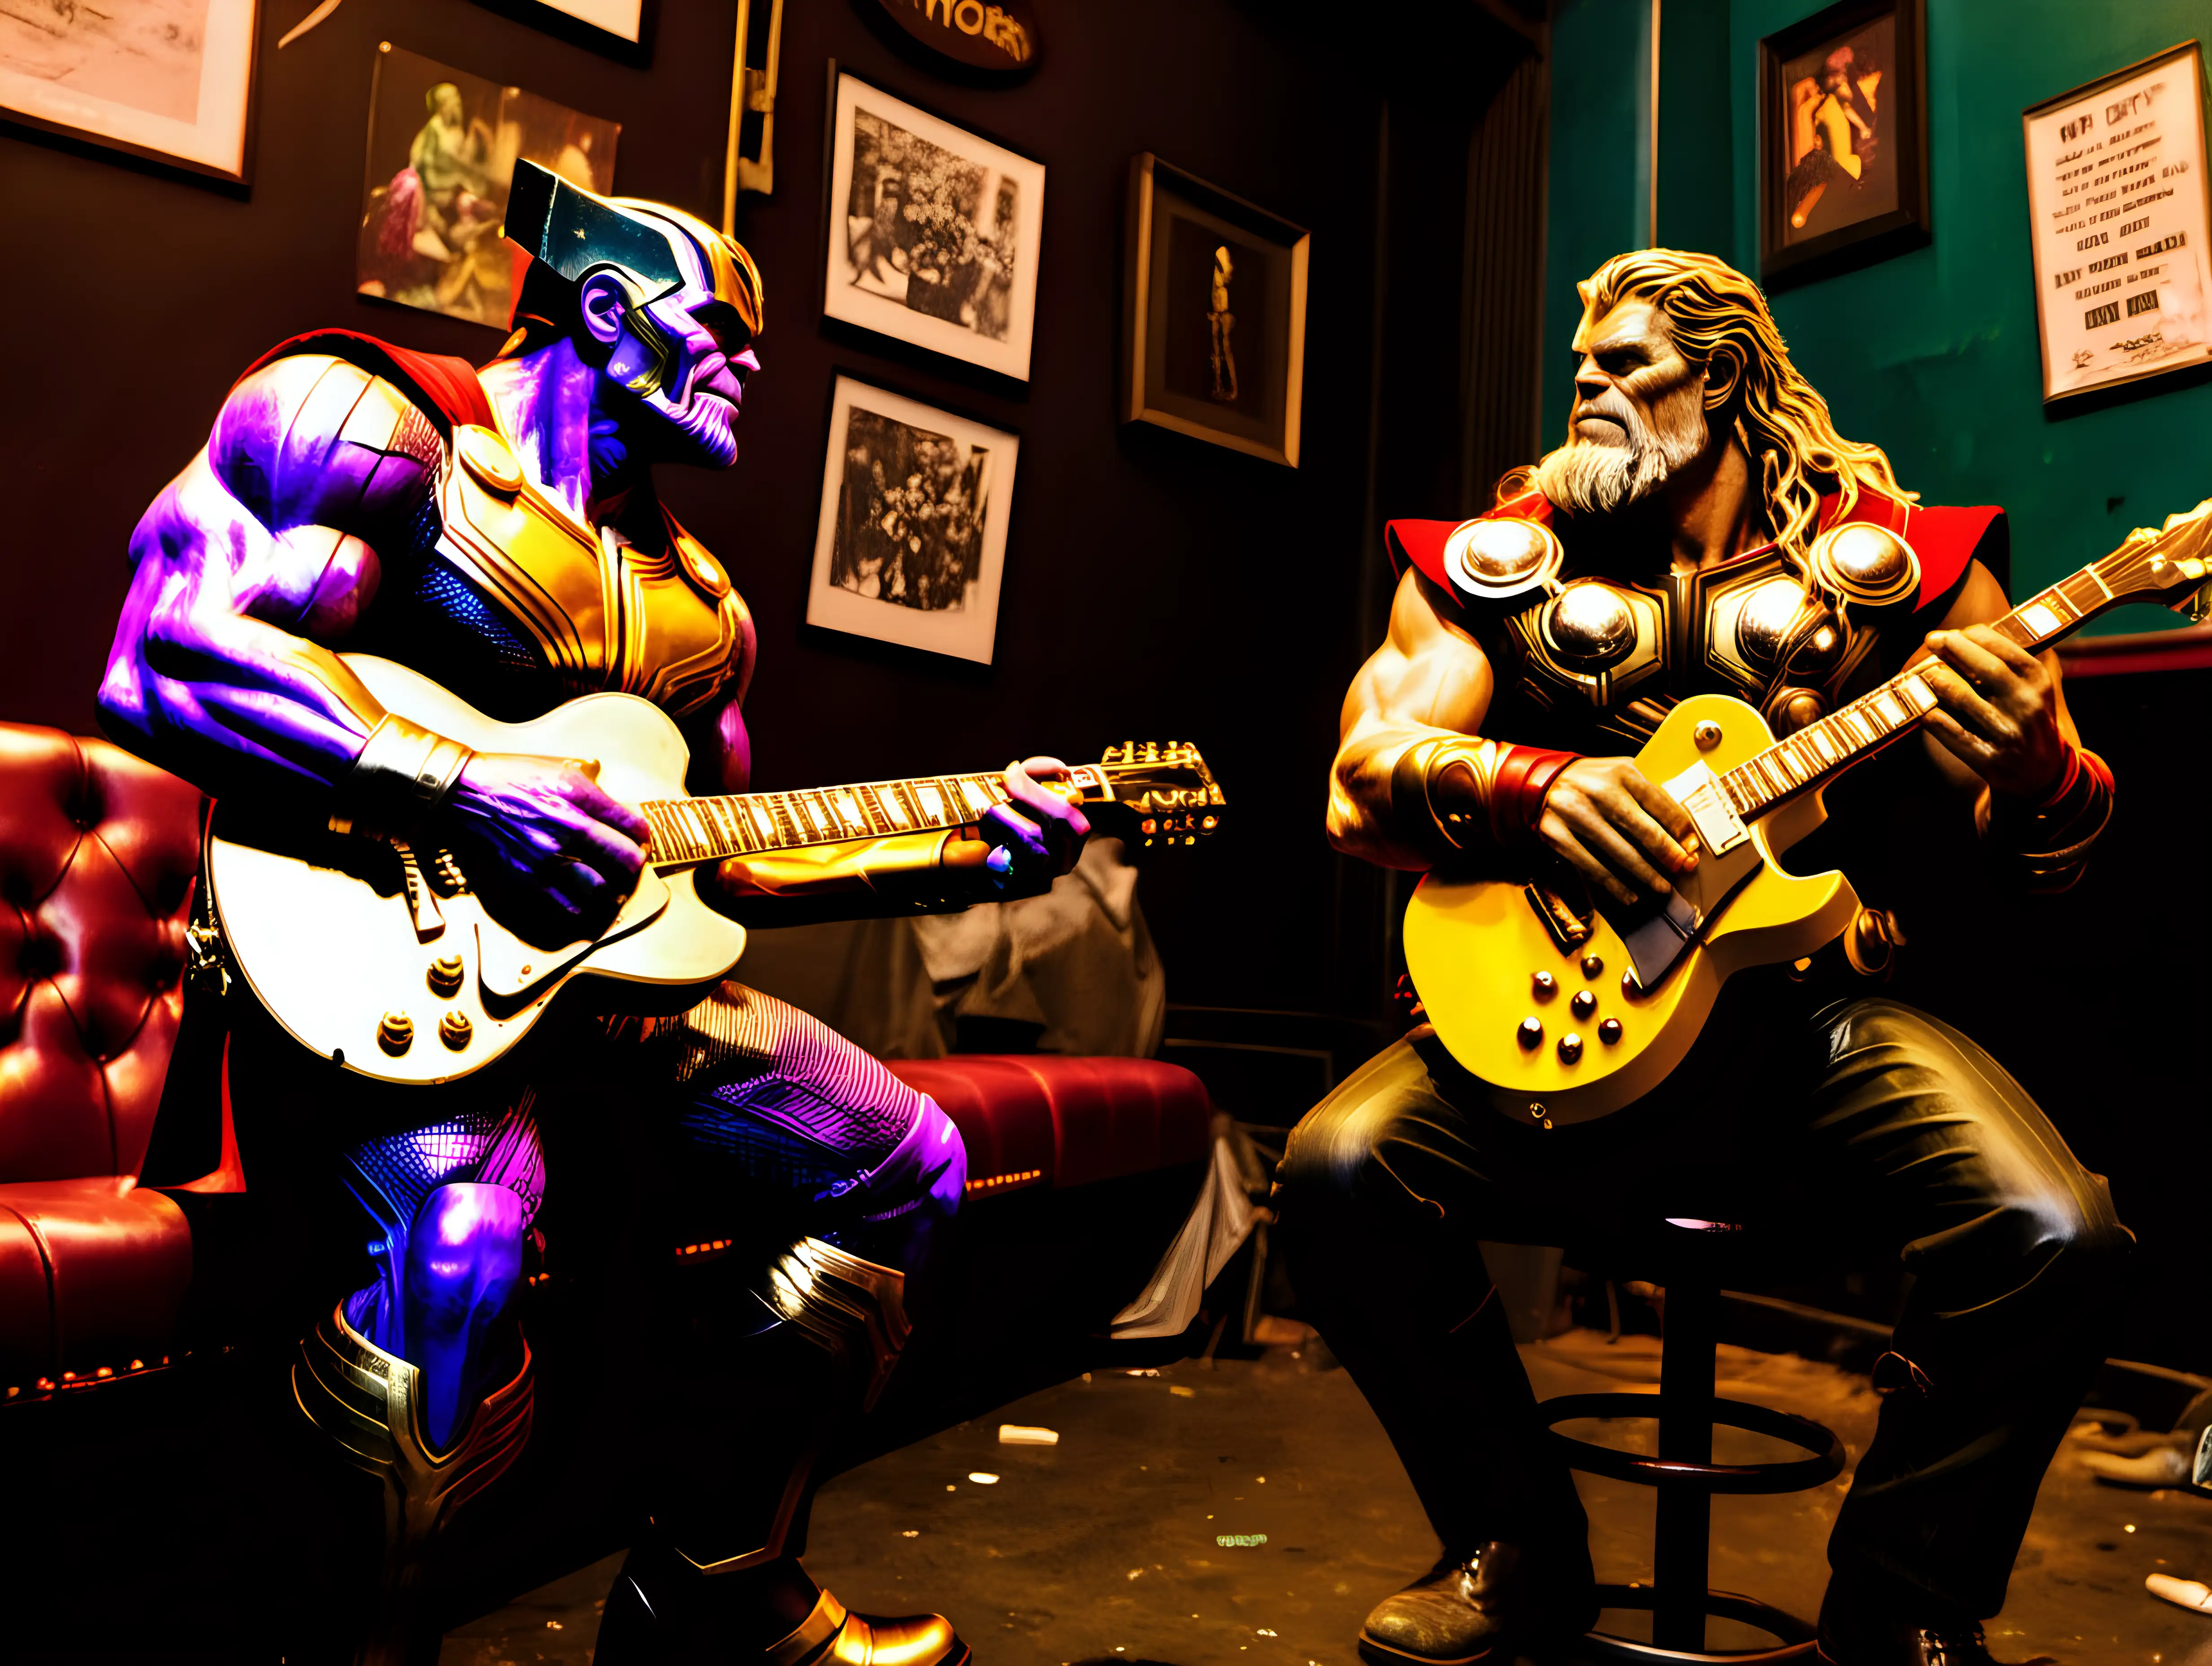  Thanos and Thor playing blues guitar in an old NYC blues club in the bowery